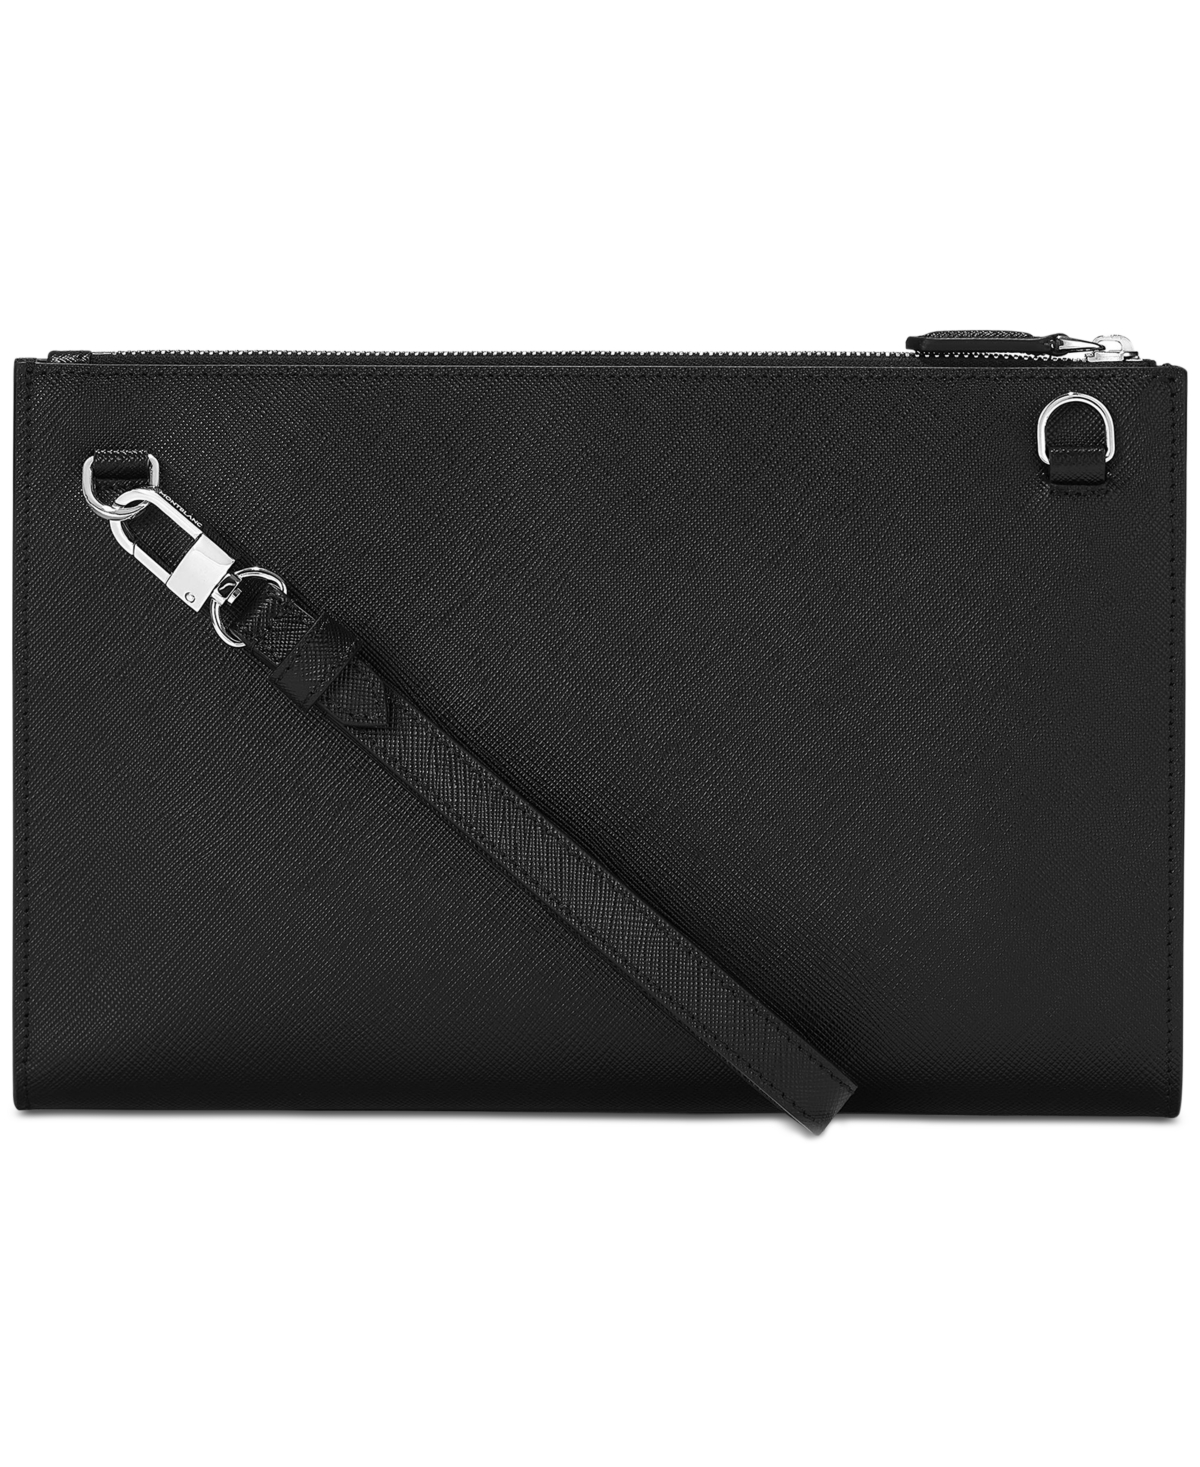 Montblanc Sartorial Leather Clutch In Black